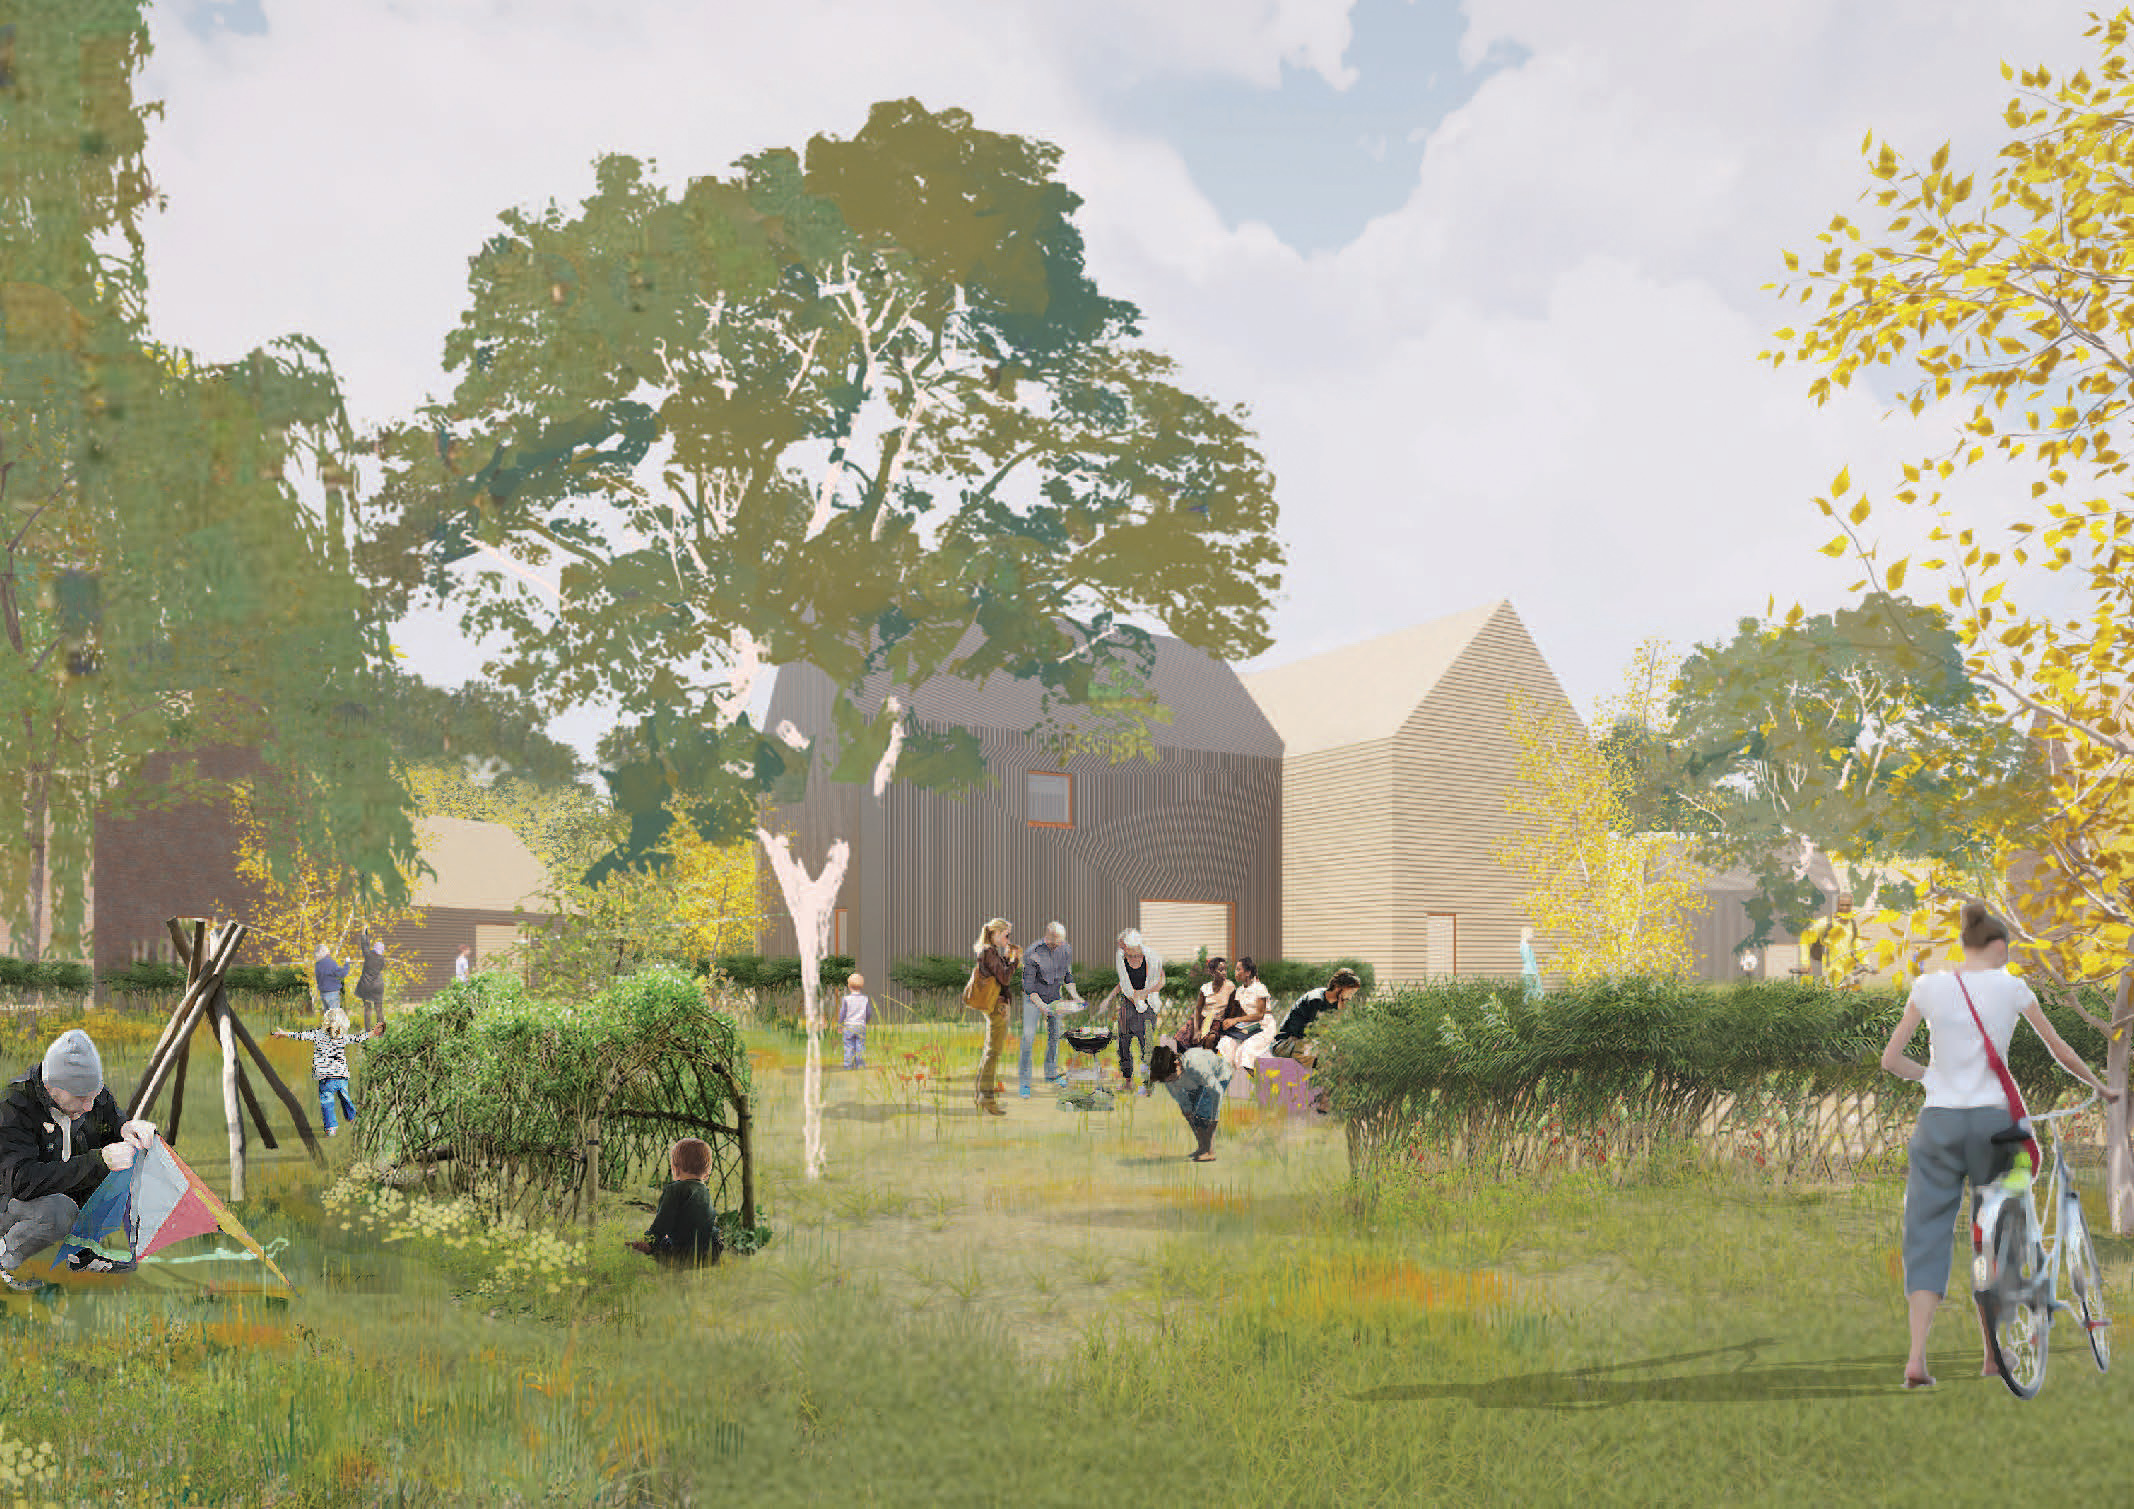 Alternative angle concept showing many residents in a communal green, by CDC studio